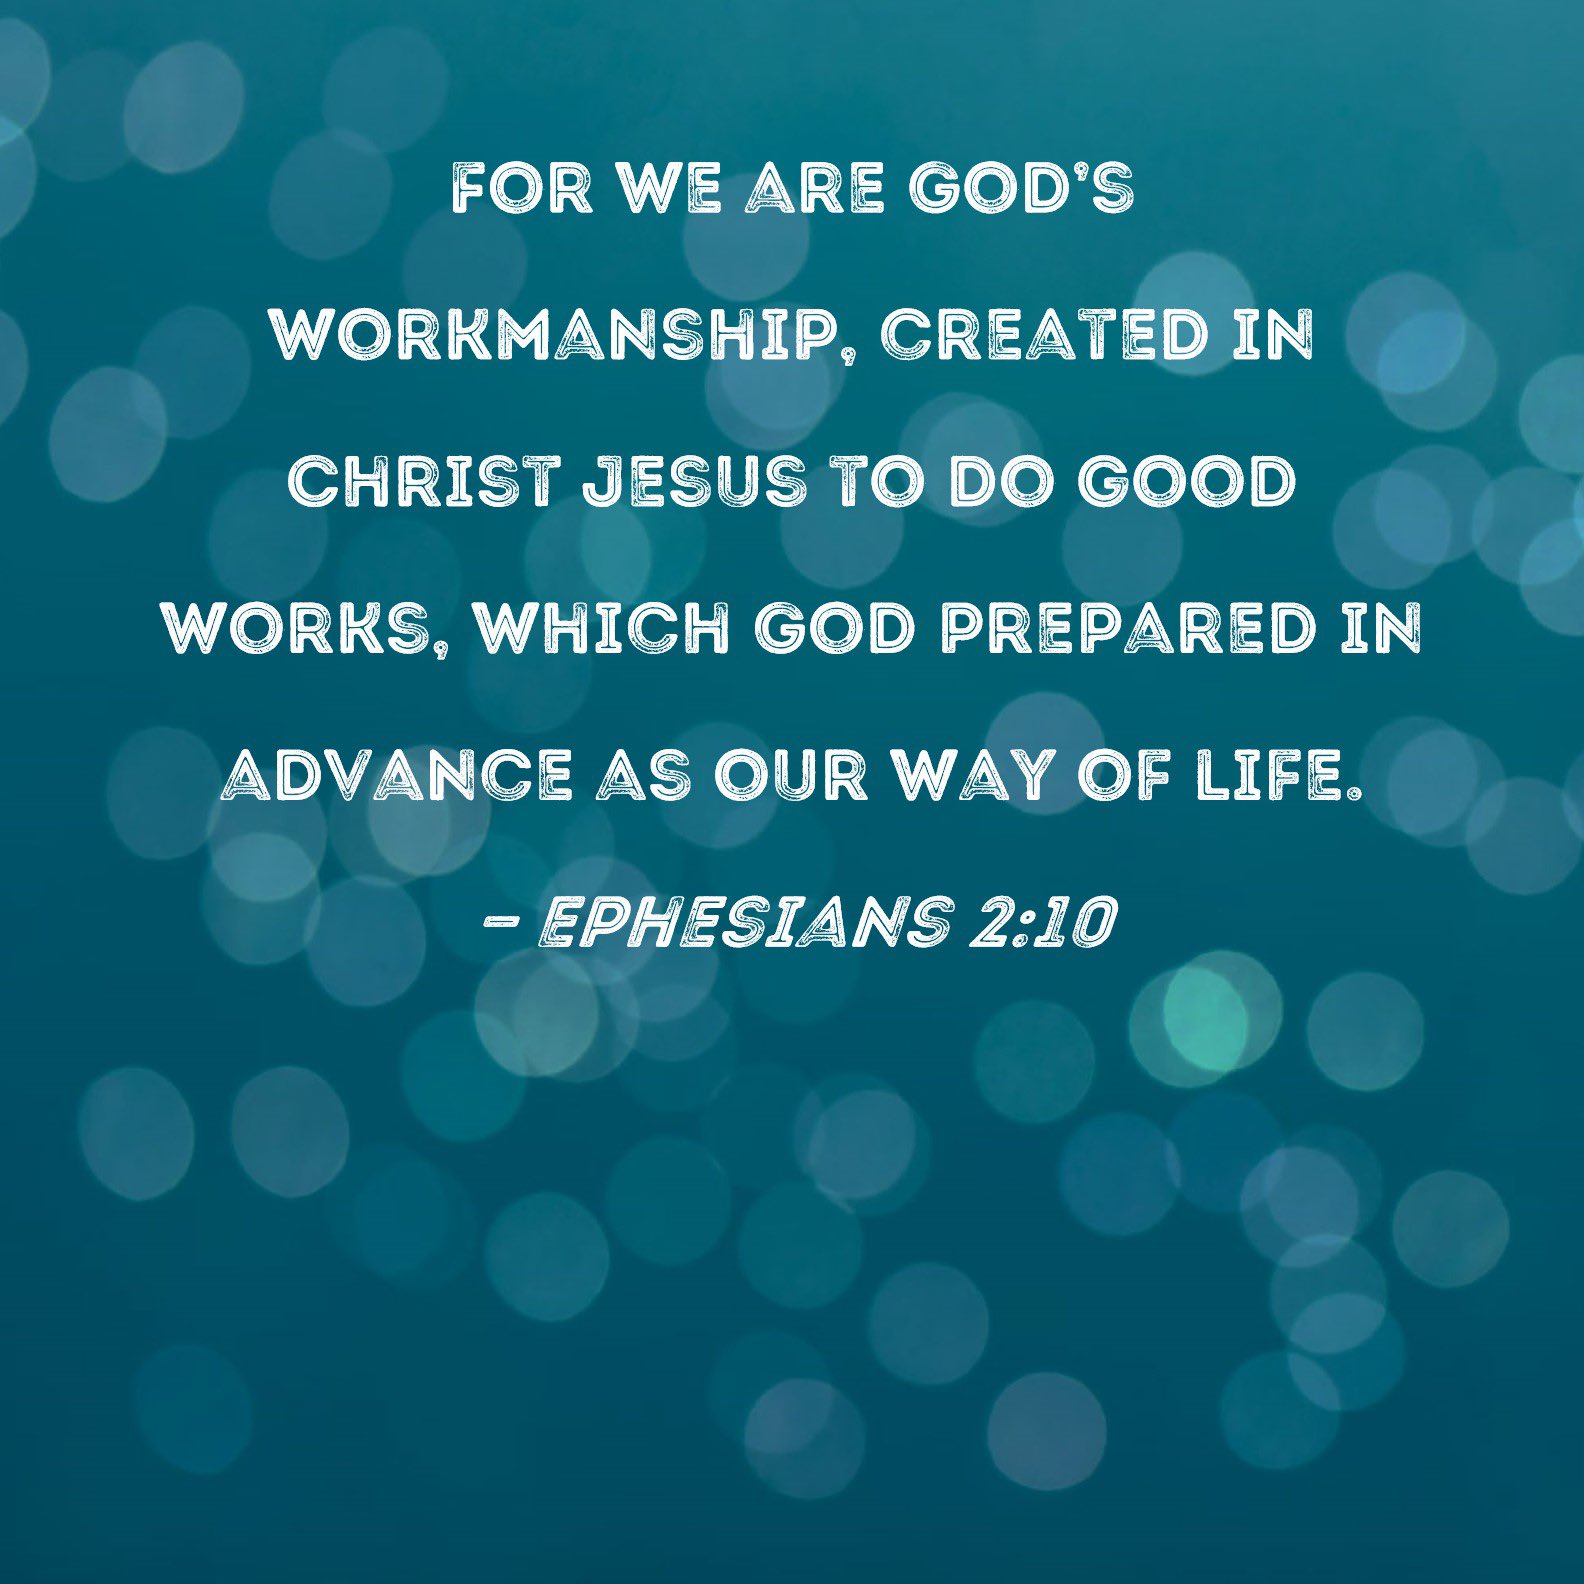 FoR WE ARE GOD'S WORKMANSHIP, CREATED IN CHRIST JESUS To DO GOOD WORKS; WHICH GOD PREPARED IN ADVANCE AS OUR WAY OF LIFE, EPHESIANS 2:10